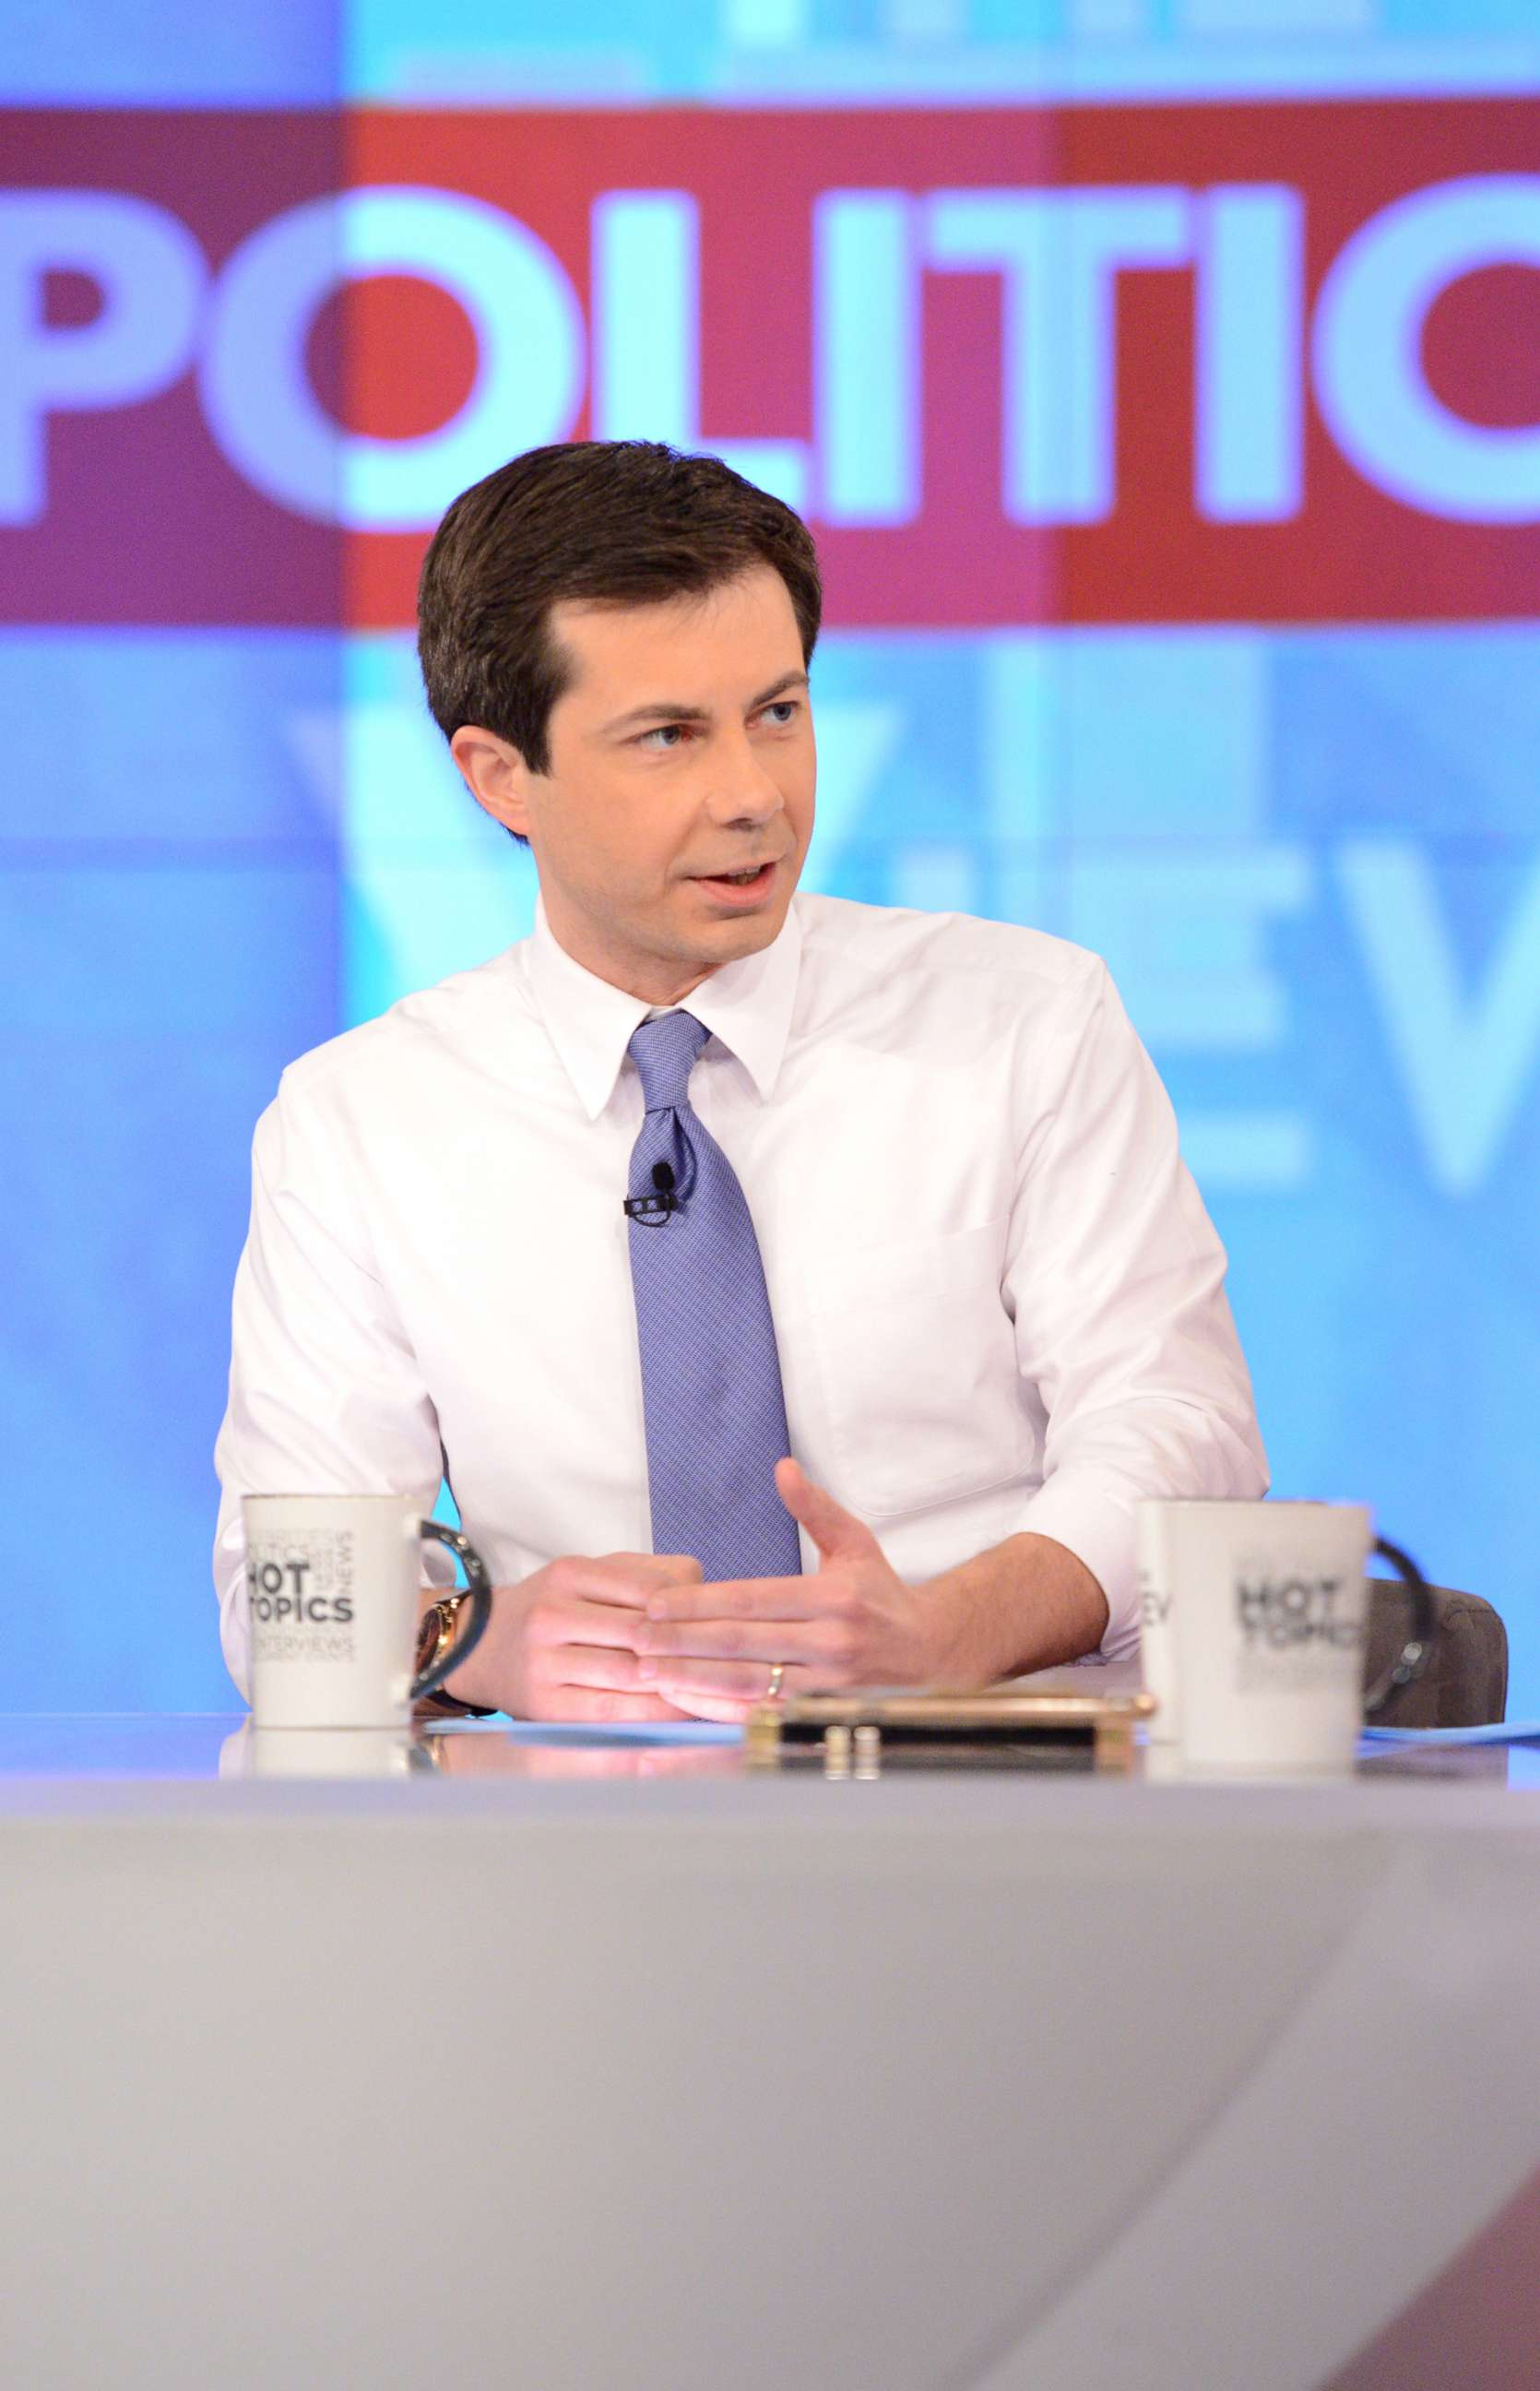 PHOTO: Mayor of South Bend, Ind., and Democratic presidential candidate Pete Buttigieg visits ABC's "The View" on Jan. 31, 2019.